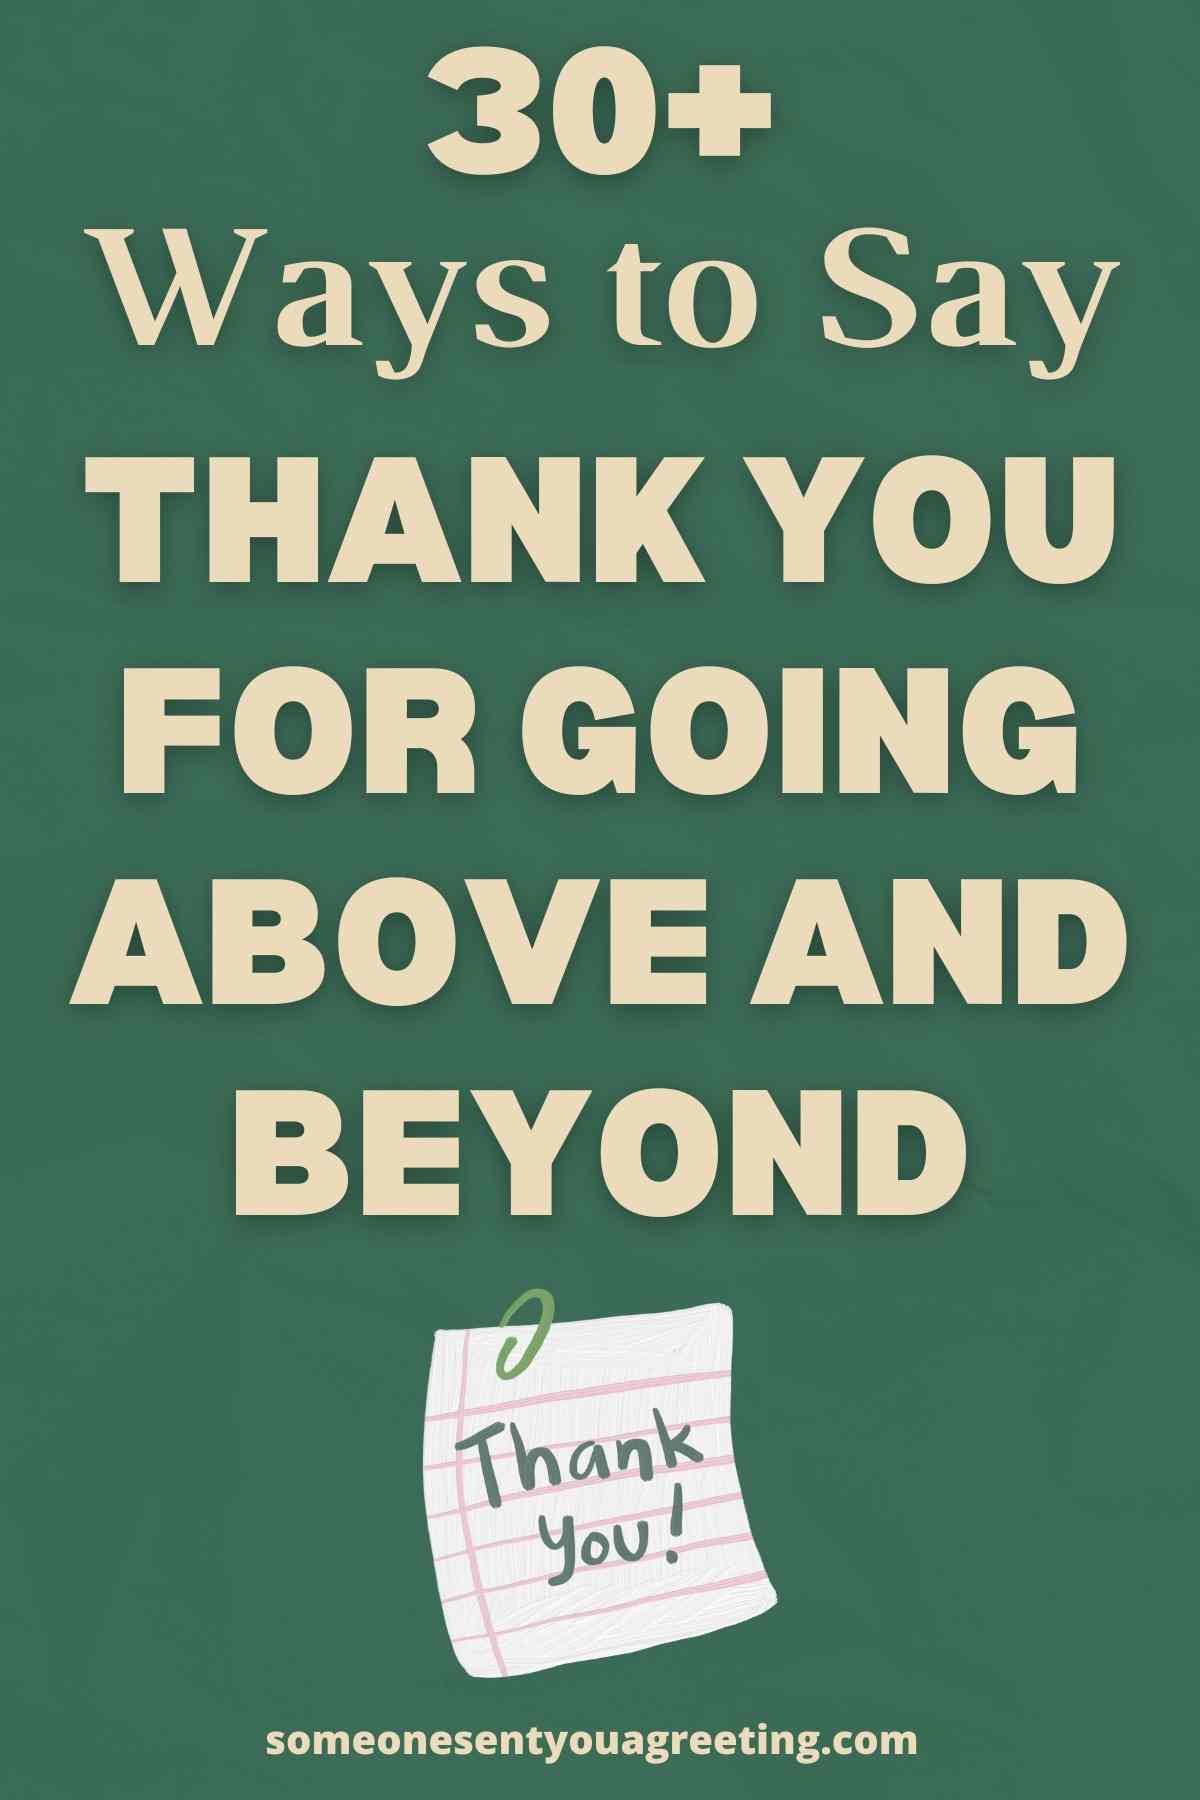 ways to say thank you for going above and beyond